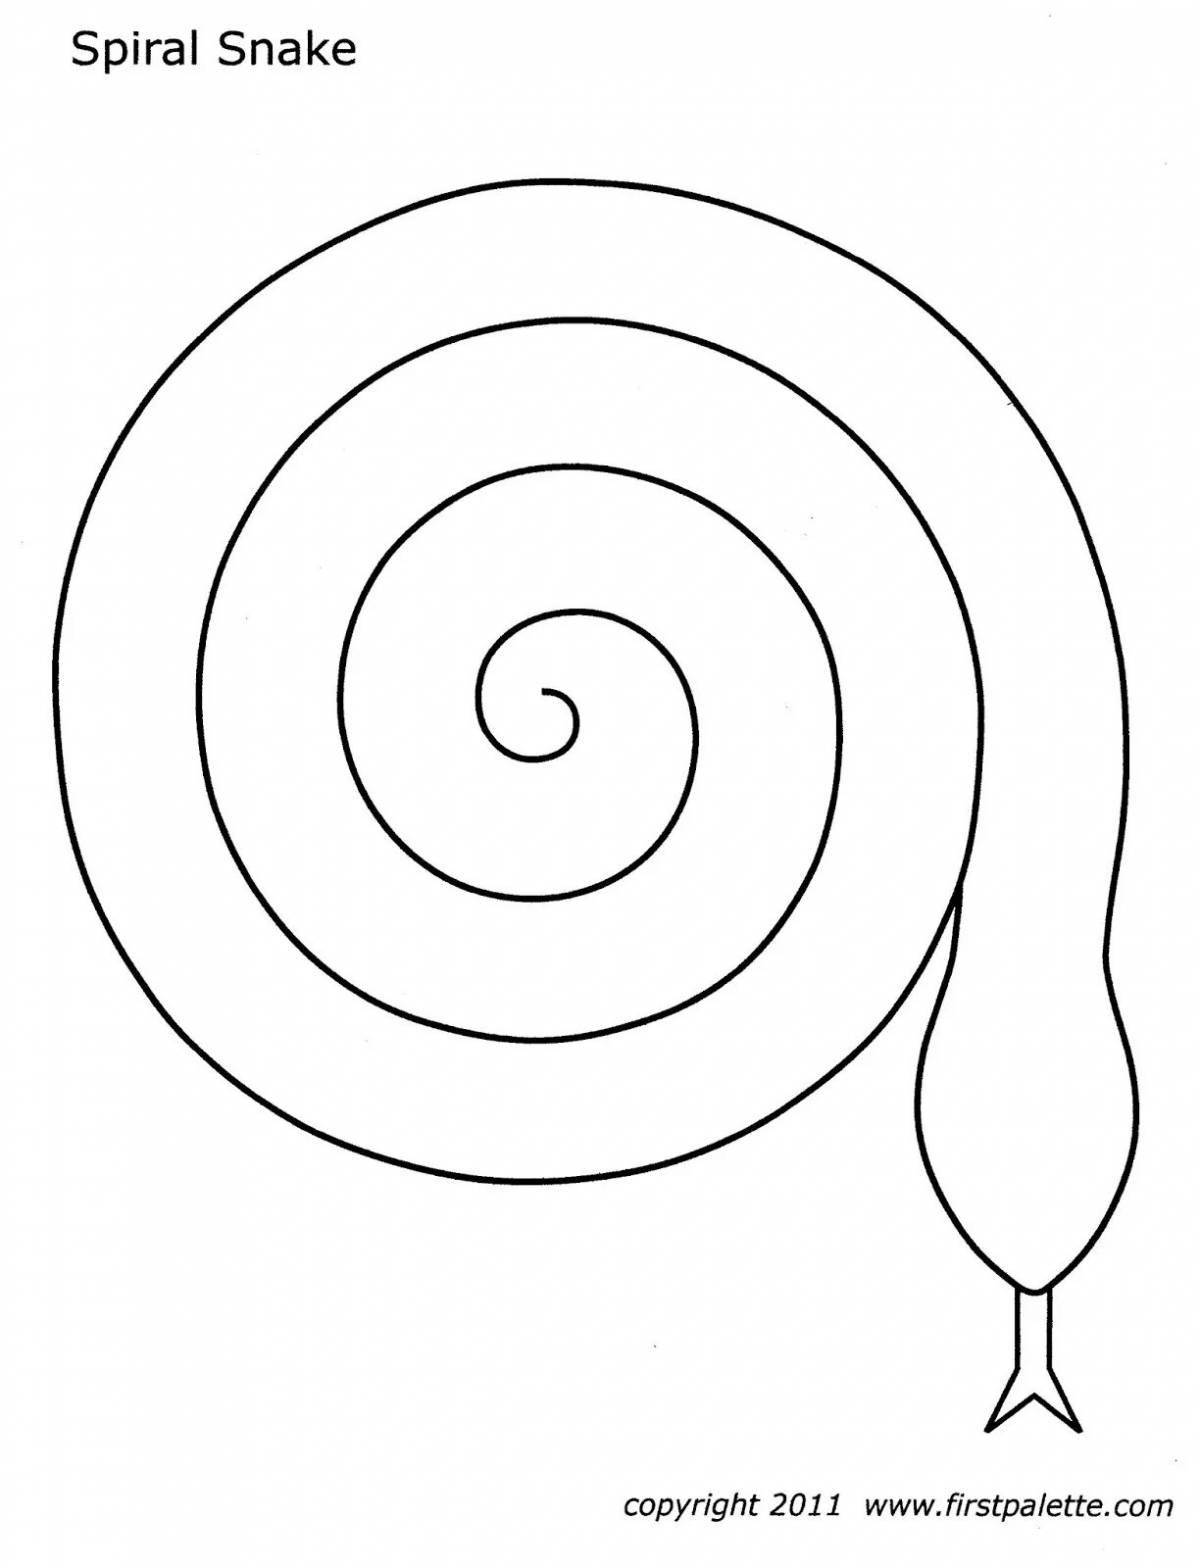 Wriggling spiral coloring page